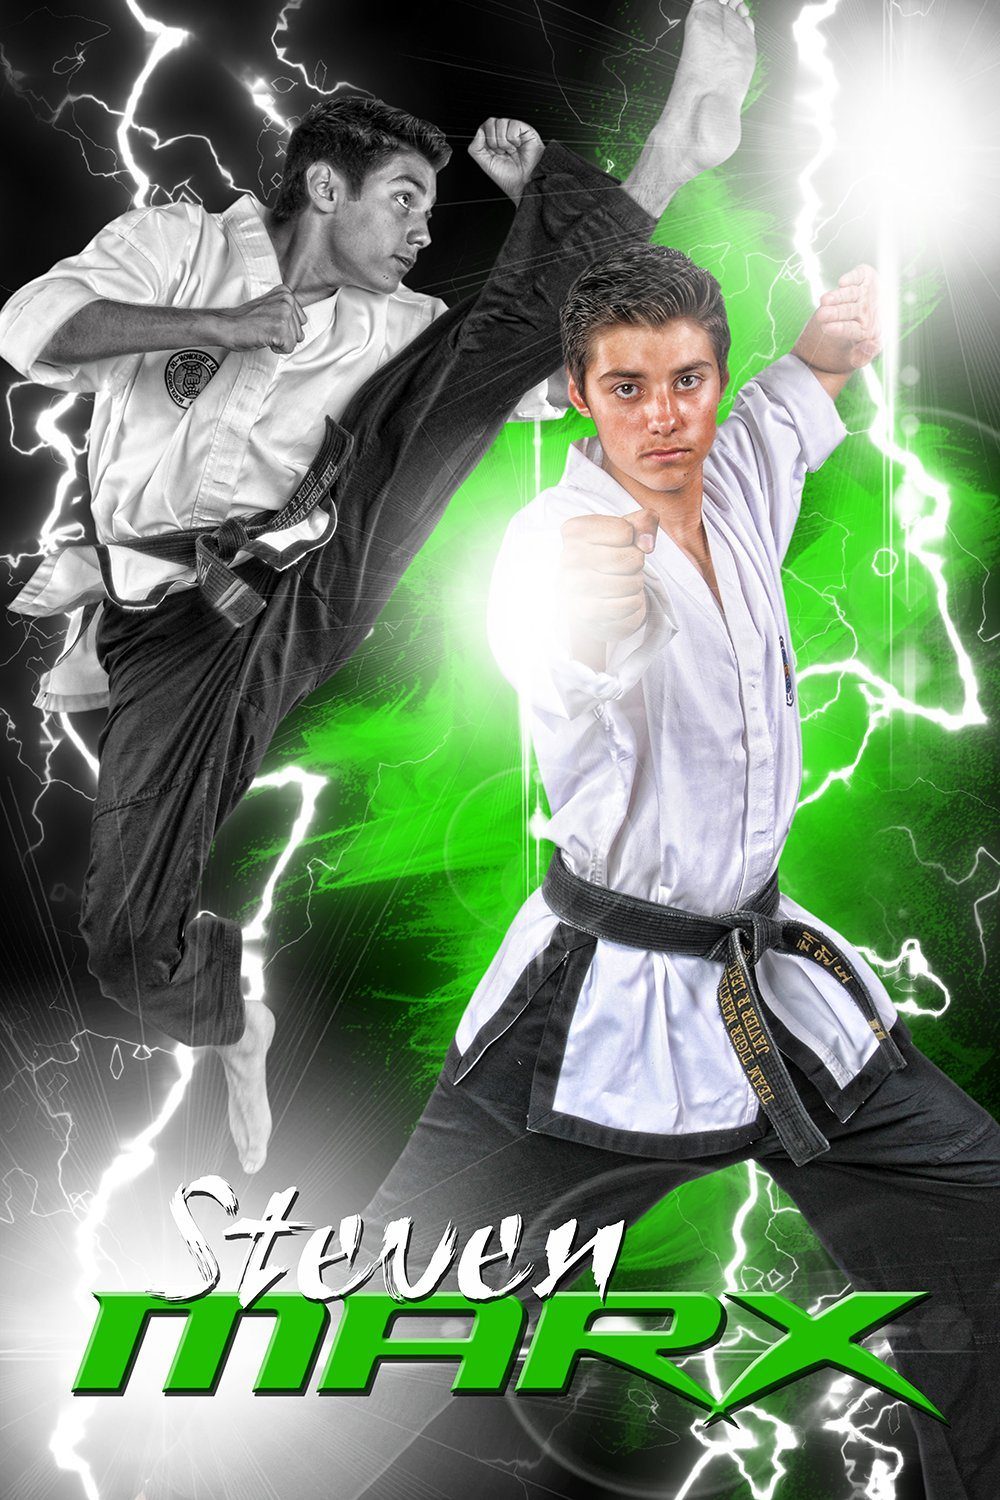 Lightning - Martial Arts Series - Poster/Banner V-Photoshop Template - Photo Solutions